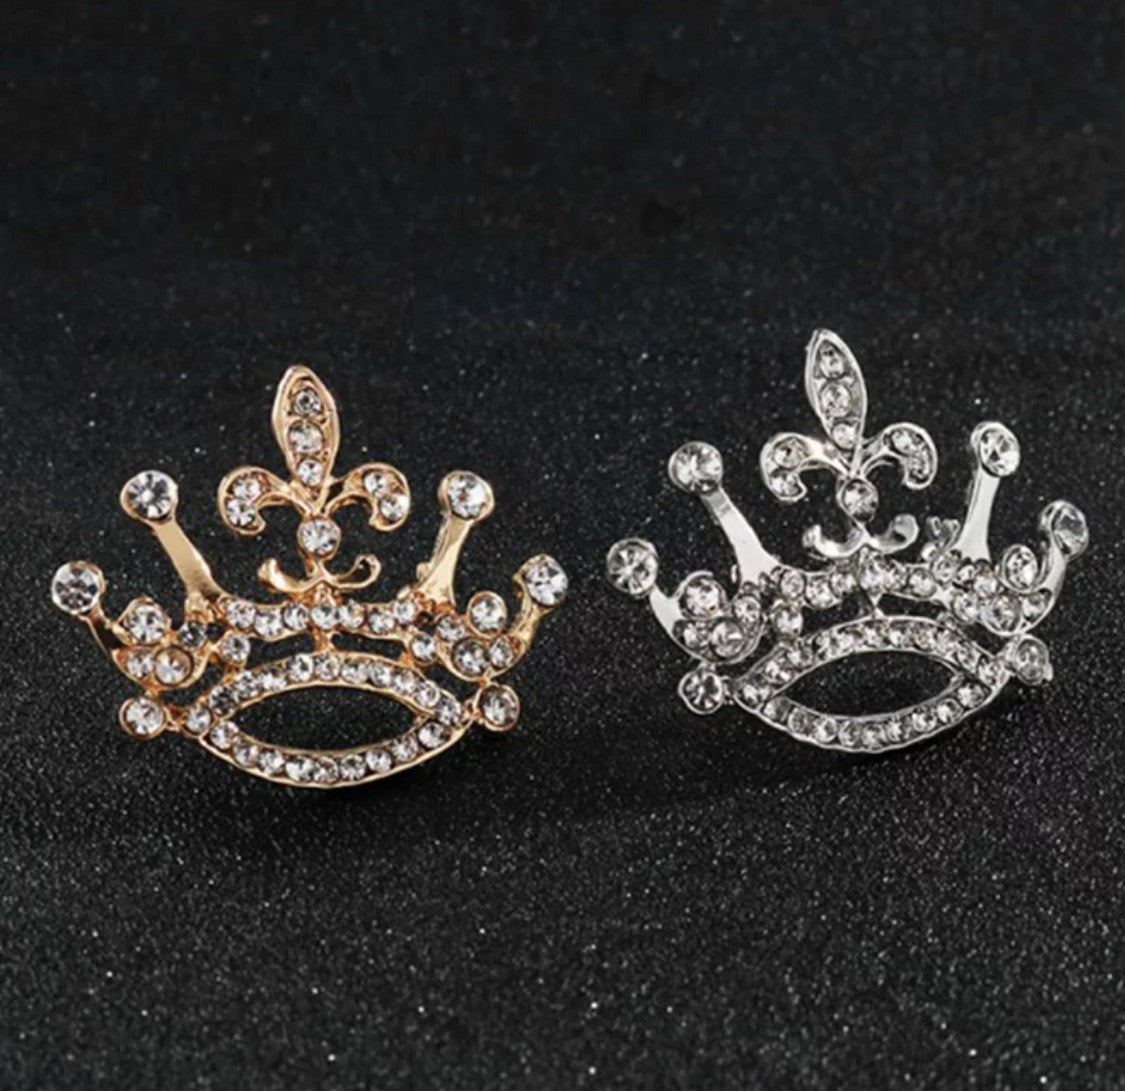 Brooch - Large Crown Silver or Gold